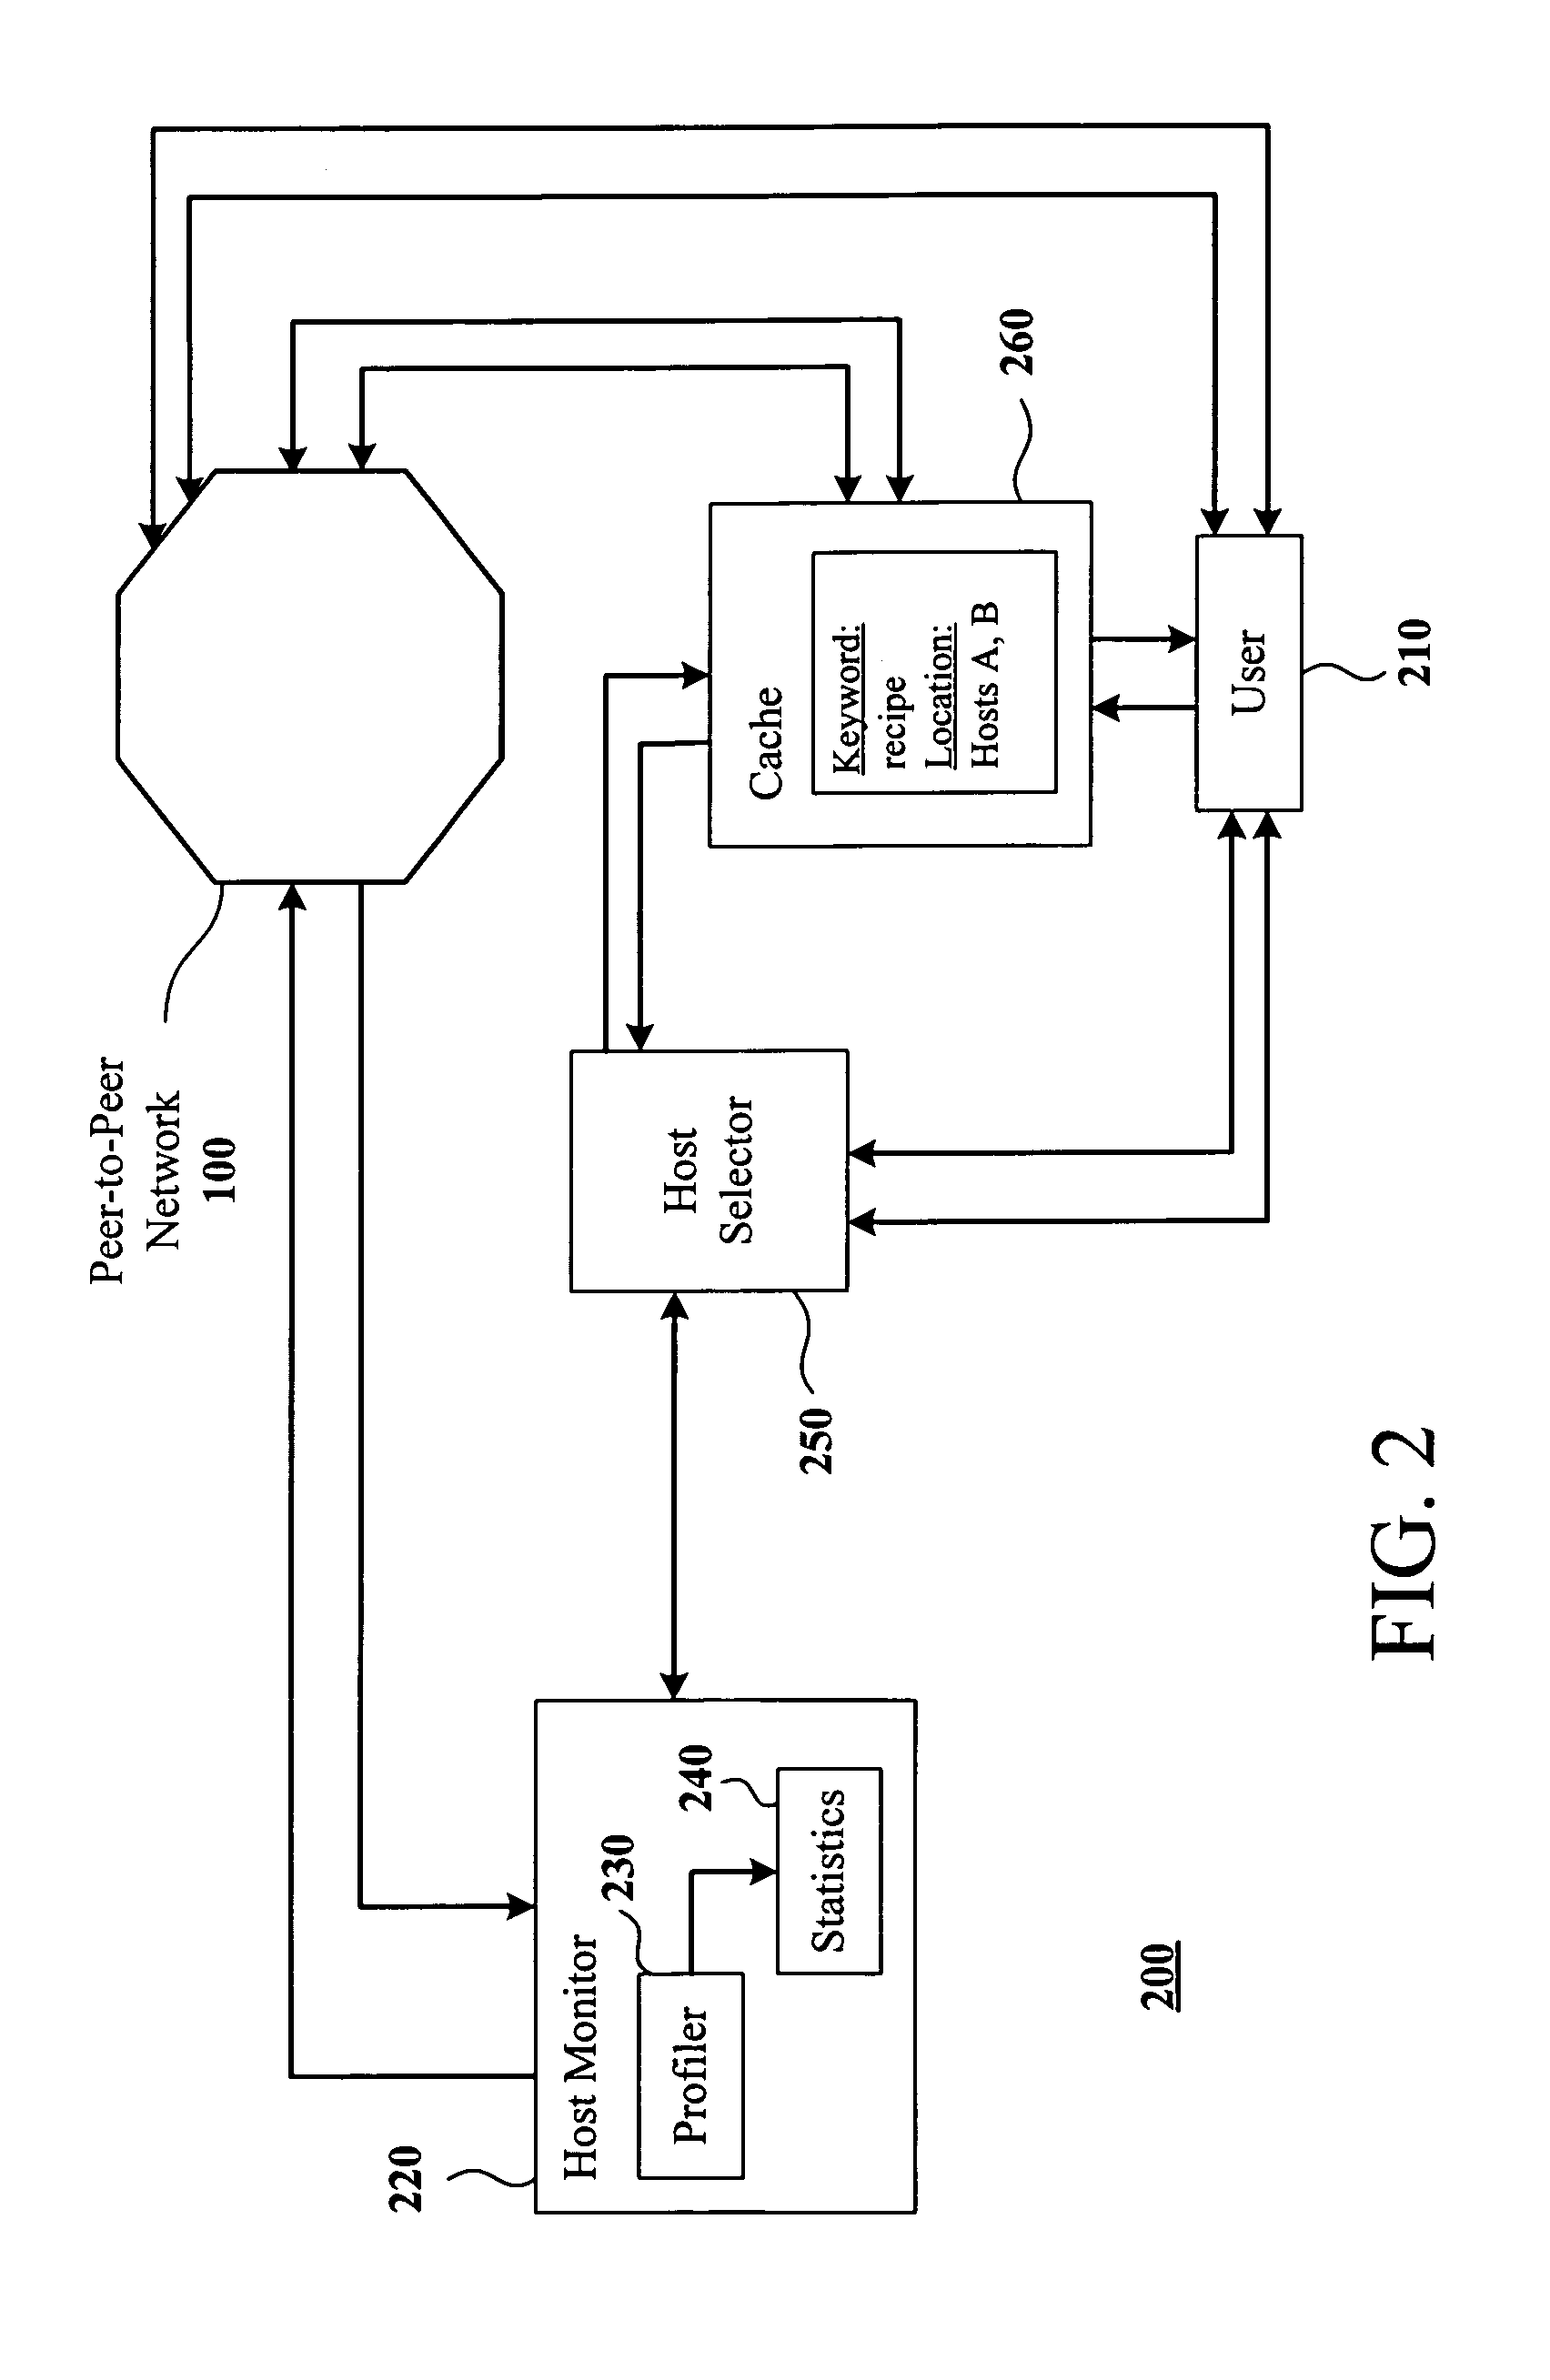 System and method for searching peer-to-peer computer networks by selecting a computer based on at least a number of files shared by the computer